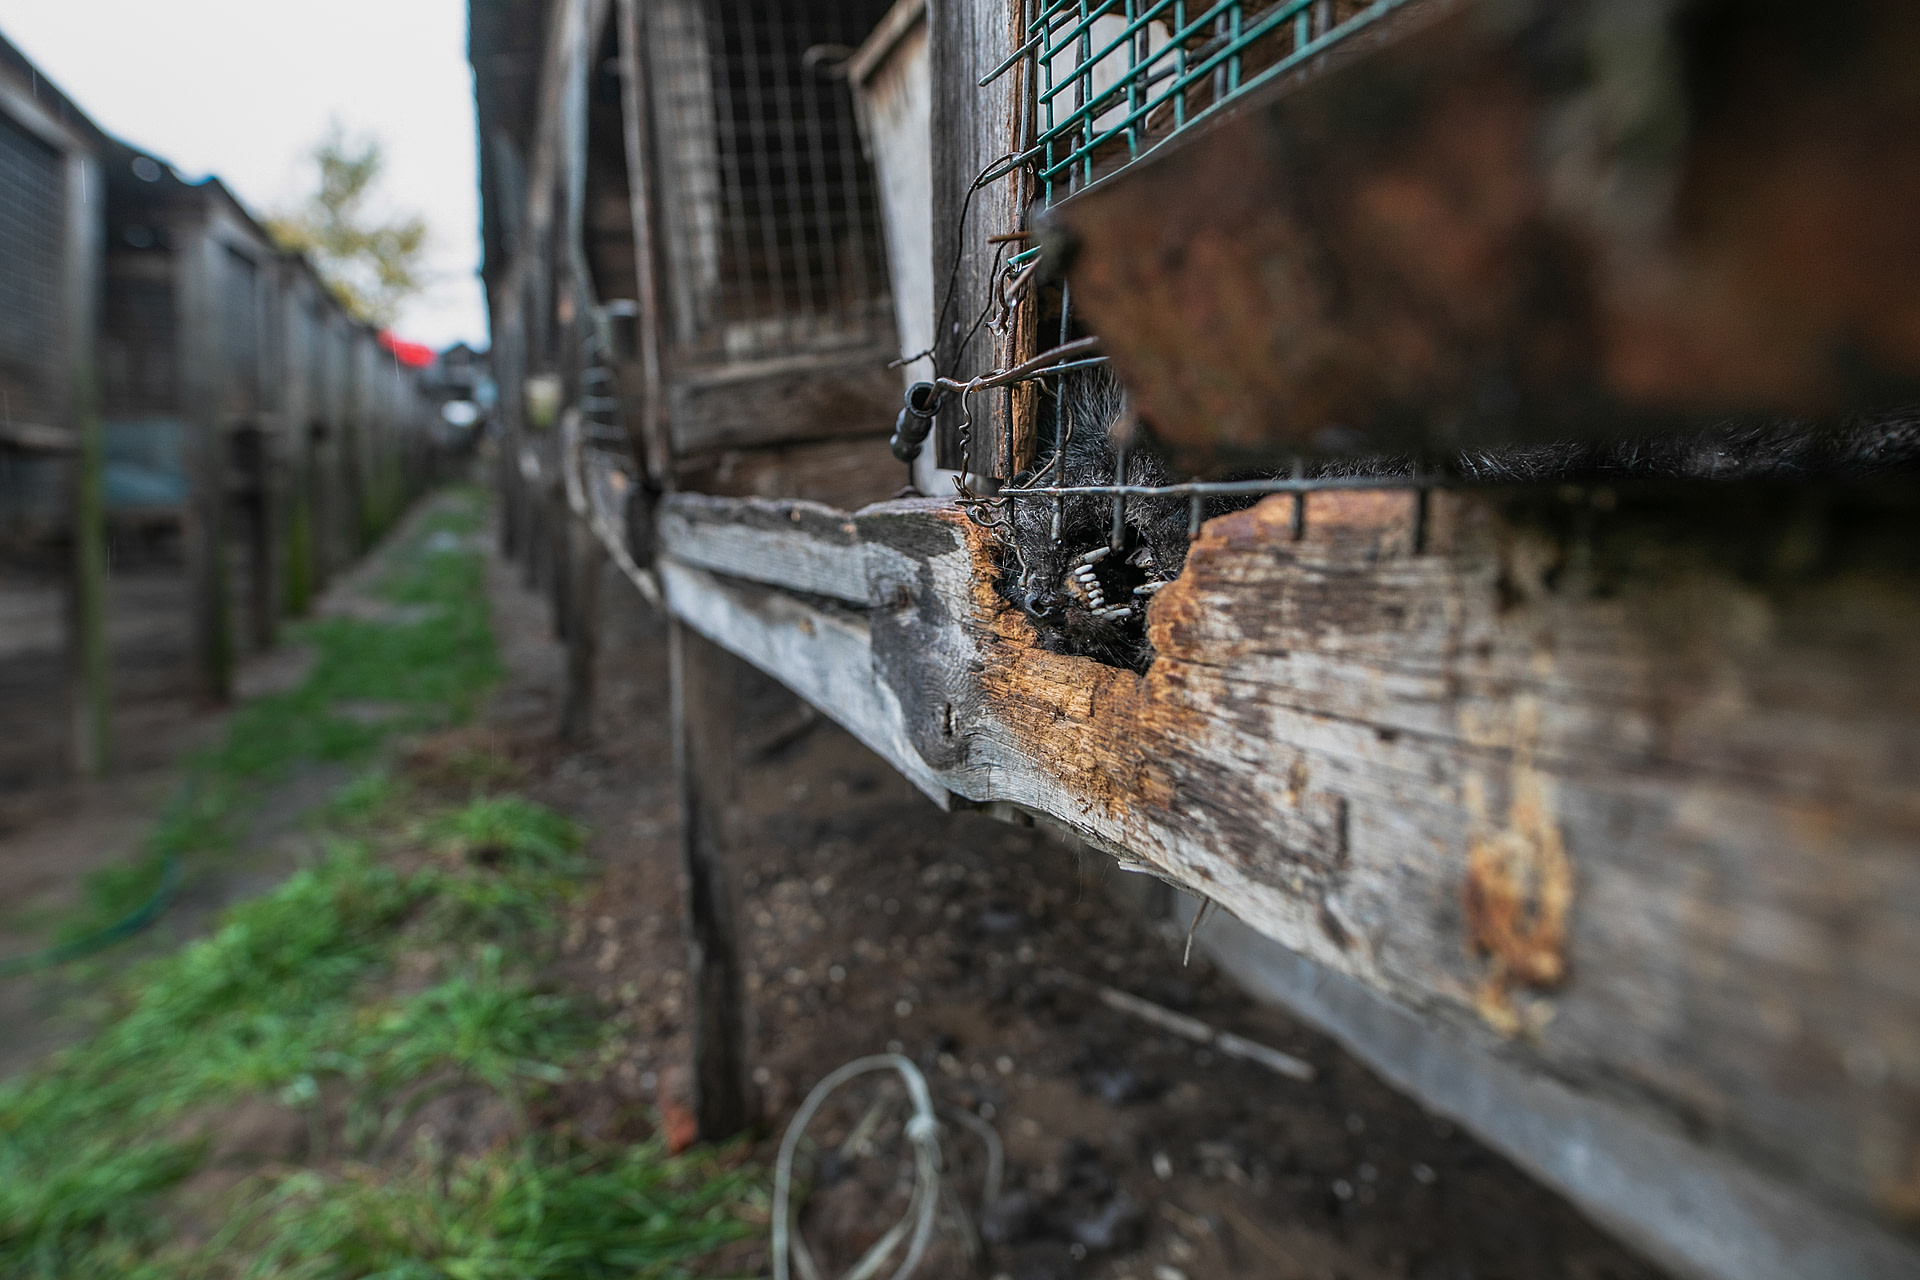 A dead silver fox at a neglected fur farm. The animal died while trying to gnaw through the wood section of the cage after being left with no food or water for several weeks. Durzyn, Poland, 2020. Andrew Skowron / We Animals Media